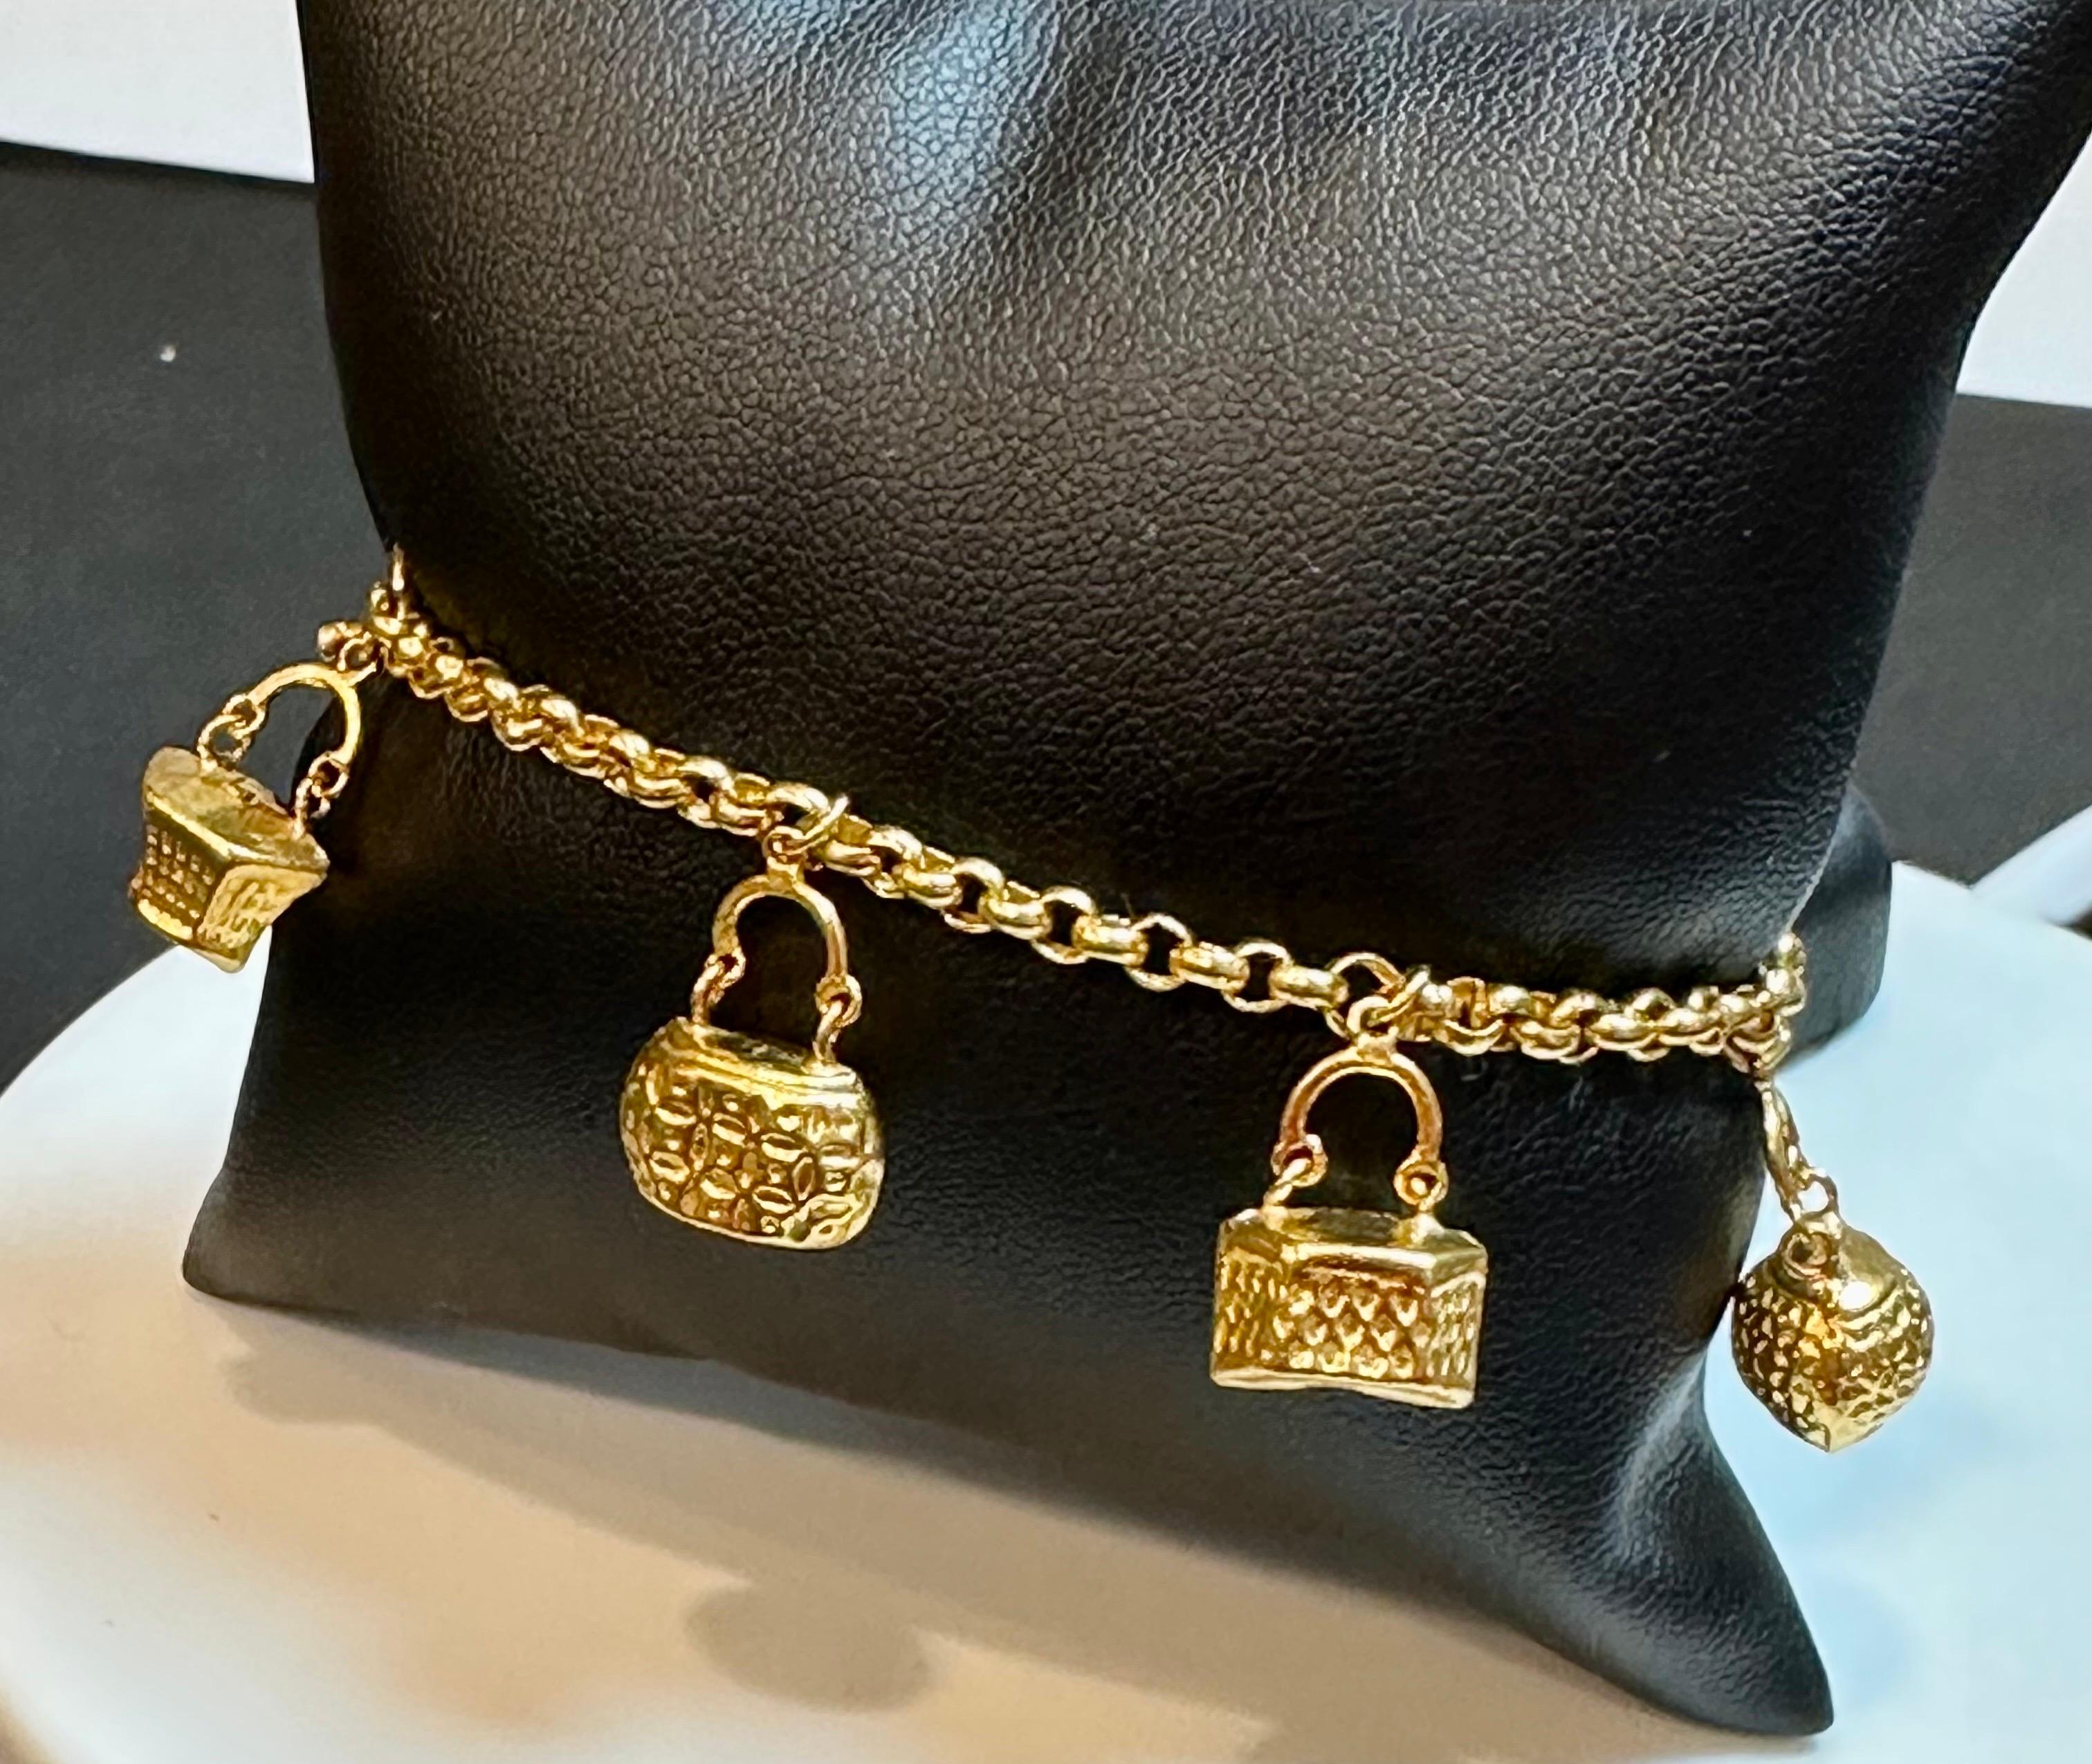 This 24 karat yellow gold bracelet is a stunning piece of jewelry crafted from authentic solid gold. The bracelet weighs 15.5 grams and measures 6.5 inches, making it a substantial and valuable addition to any collection. The bracelet is nicely